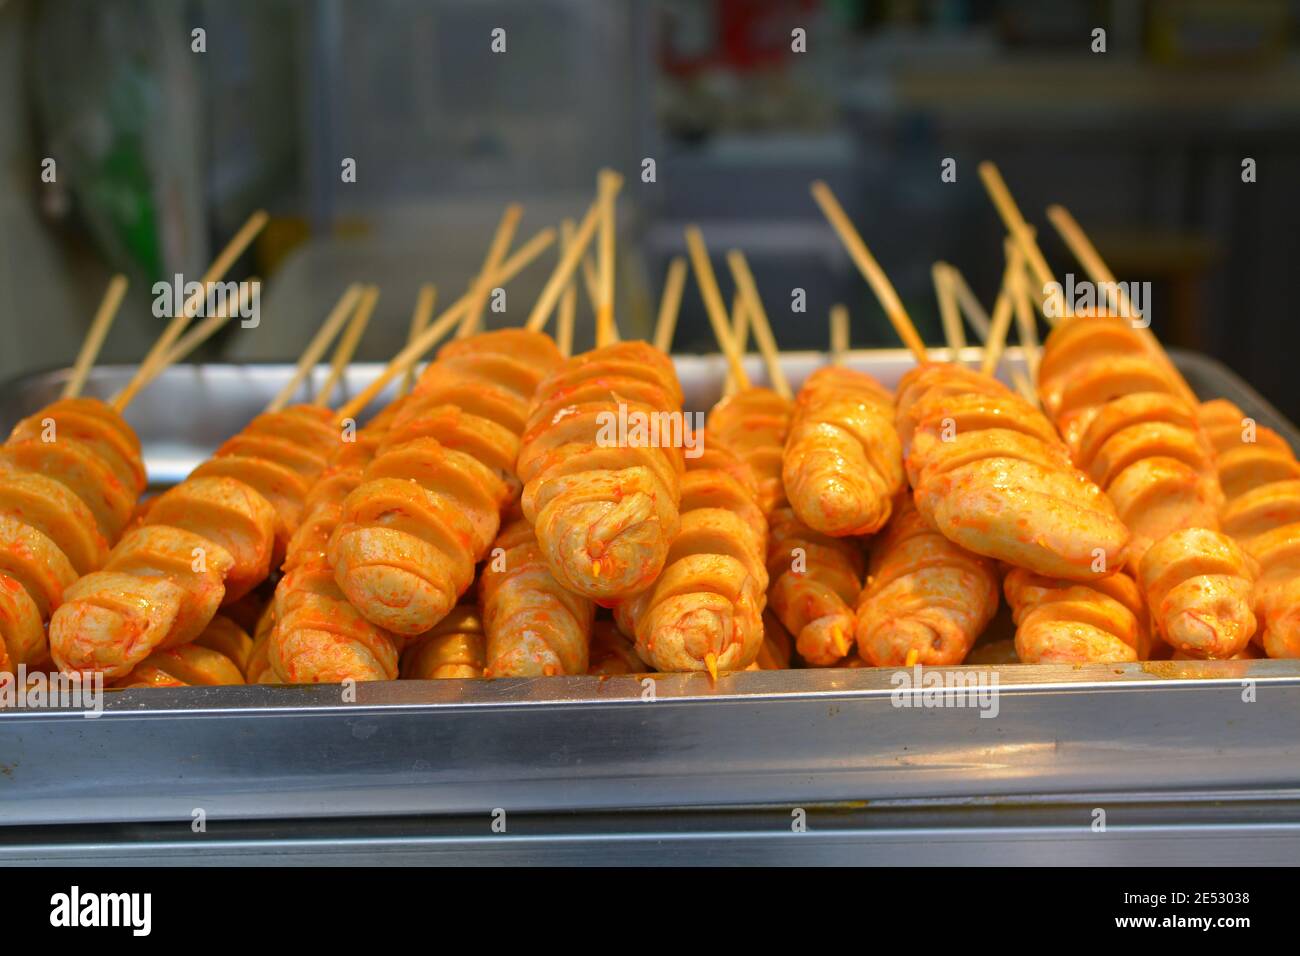 Street food market in Jiaxing, Zhejiang, China. Hotdogs cut and sprinkled with spices. Jan 2020 Stock Photo